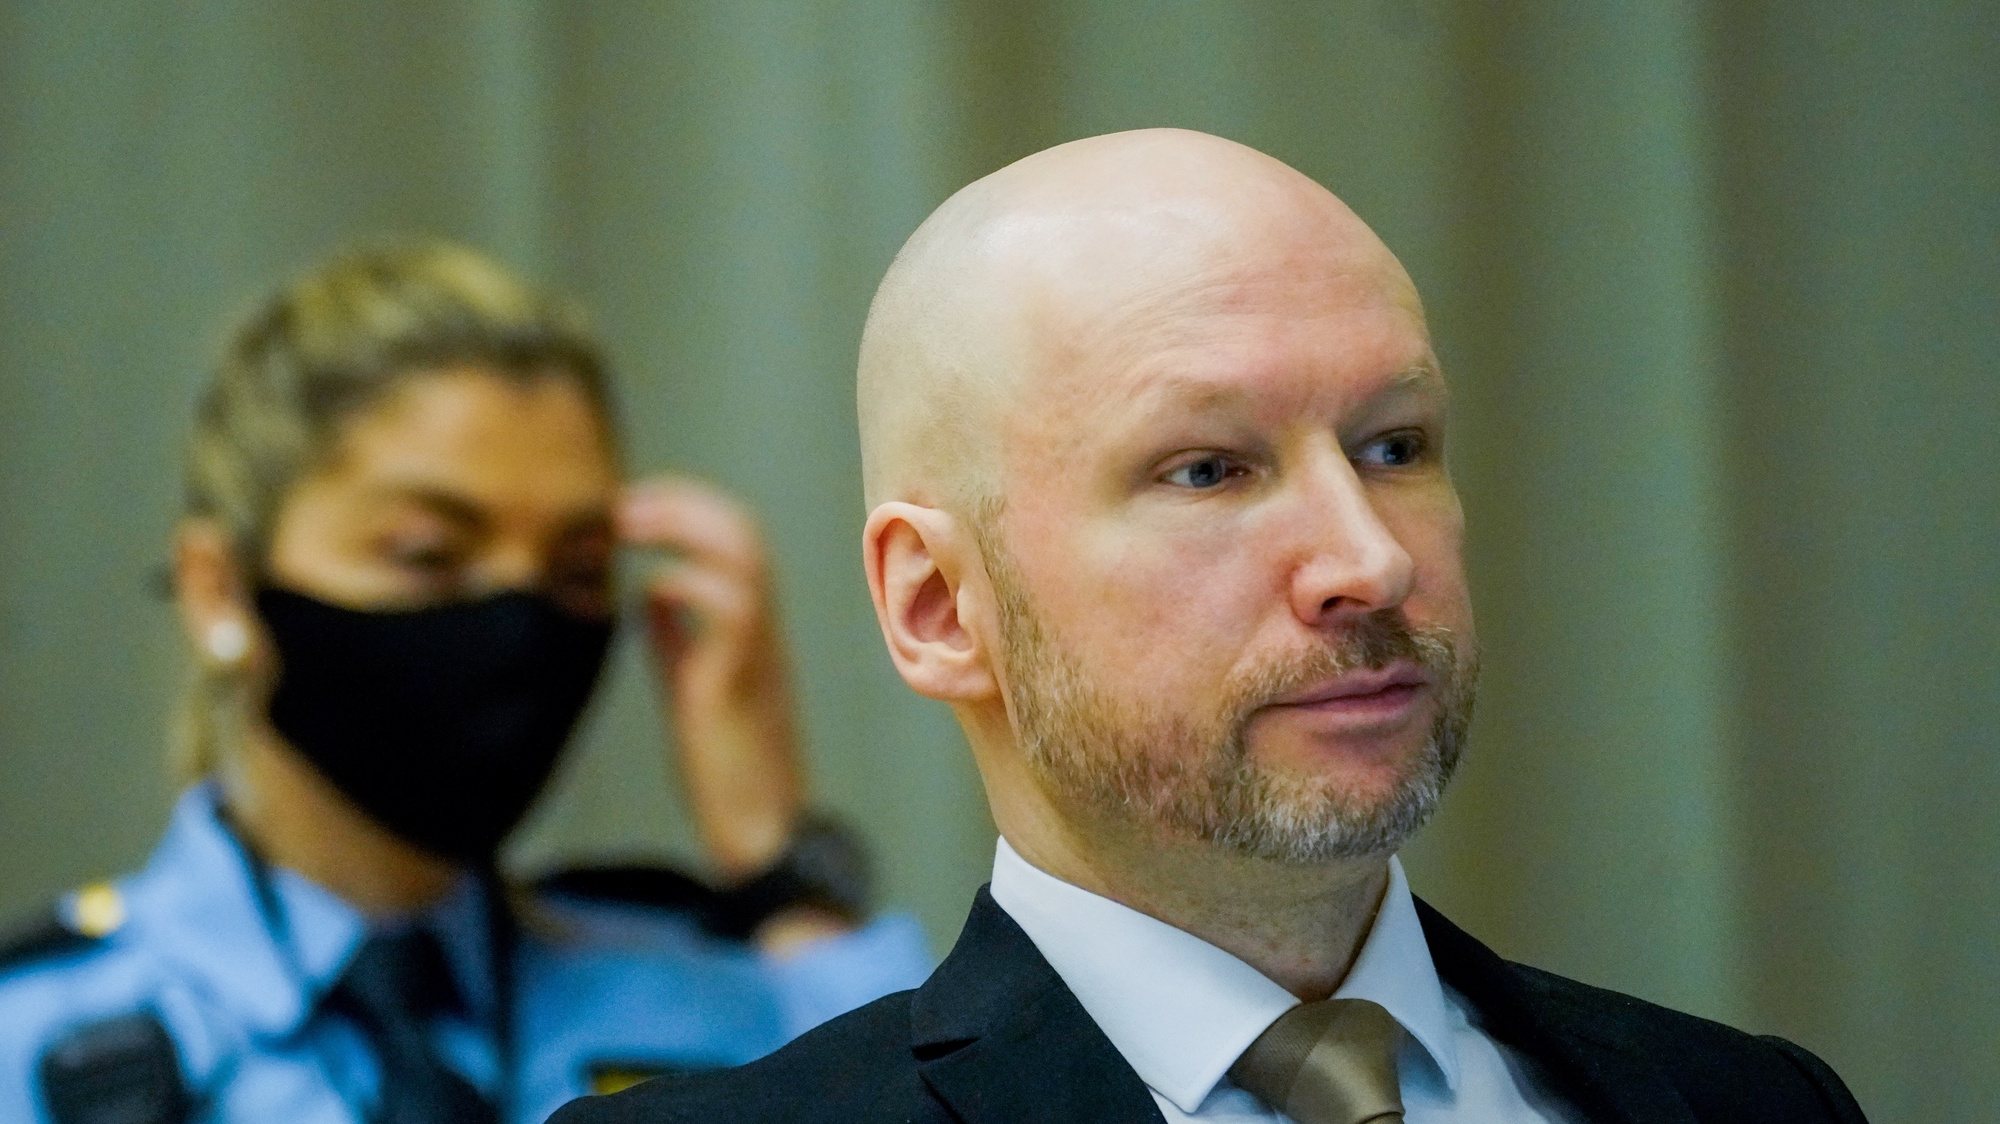 epa09692606 Anders Behring Breivik, convicted of terrorism, attends the first day of his parole hearing, in Skien, Norway, 18 January 2022. Breivik, who changed his name to Fjotolf Hansen in 2017, is to appear before court for his three-days parole hearing in Oslo on 18 January 2022. Mass murderer Anders Behring Breivik was sentenced to a maximum term of 21 years for killing 77 people in bomb and shooting attacks on 22 July 2011, and is entitled under Norwegian law to have his sentenced reviewed after ten years served. The case is being processed by Telemark District Court, but is physically taking place in a makeshift courtroom in Skien prison.  EPA/Ole Berg-Rusten / POOL NORWAY OUT